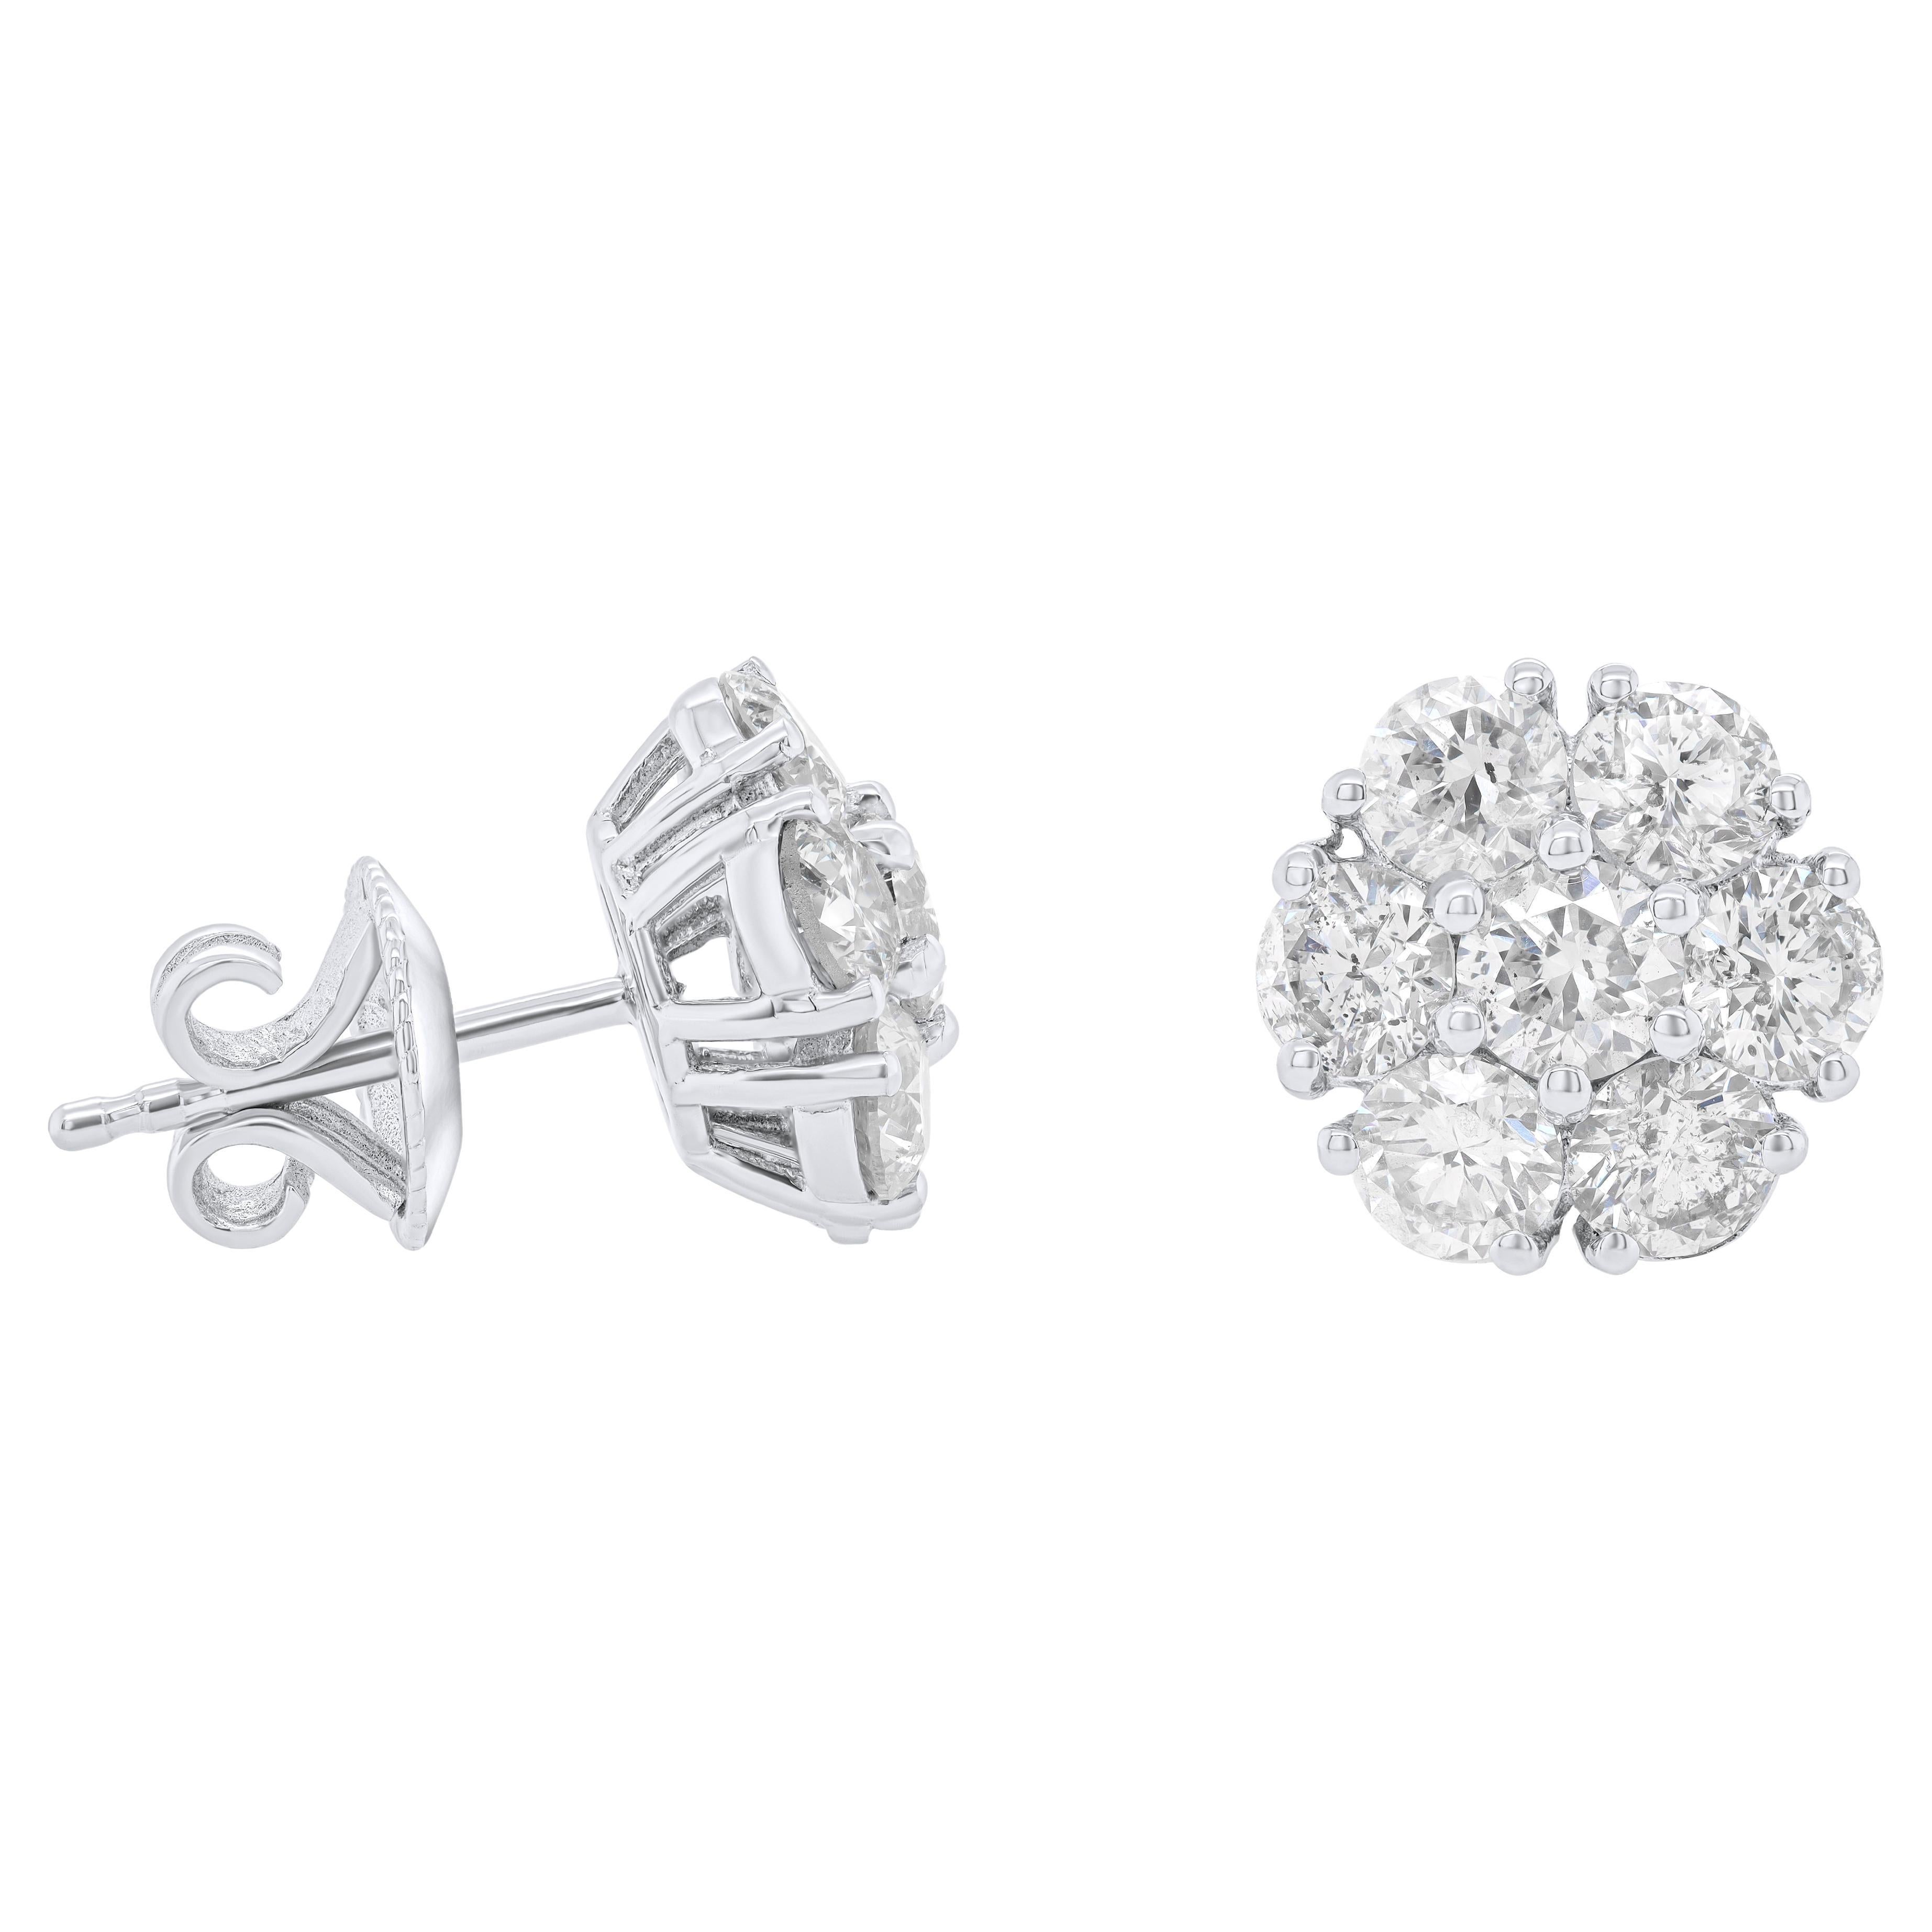 Diana M. 14 kt white gold stud earrings with a flower design  For Sale